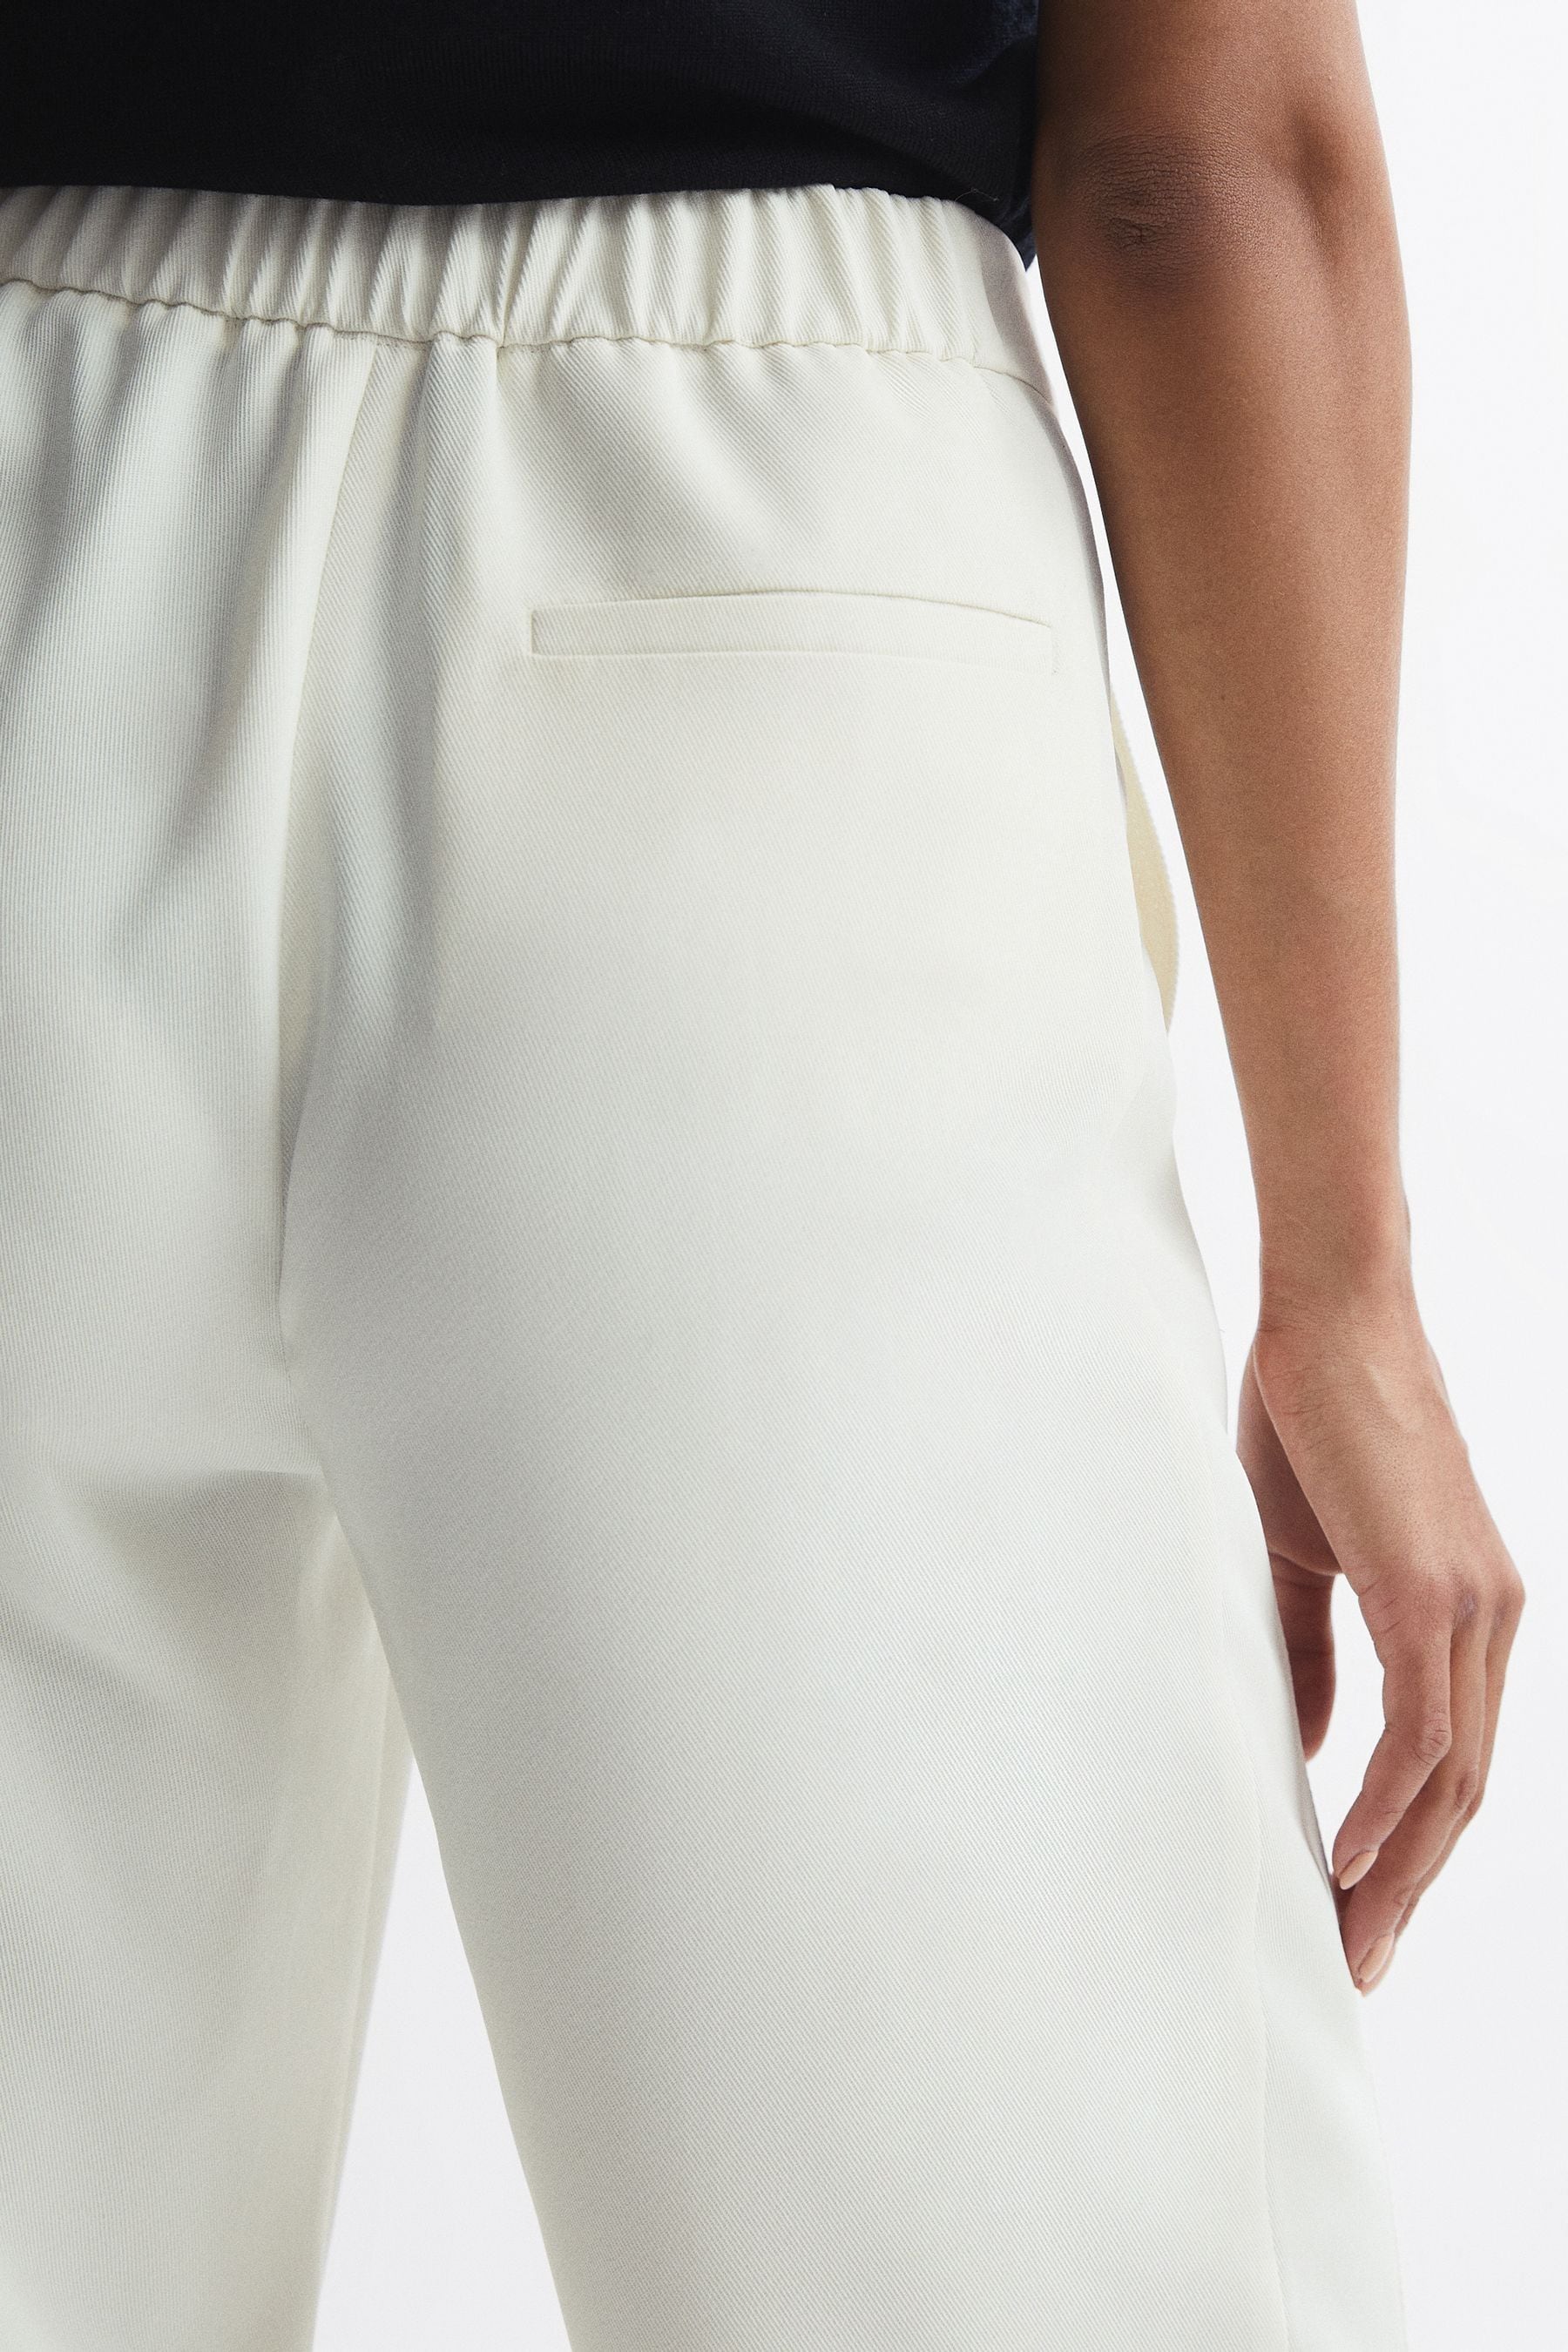 Buy Reiss Cream Aleah Petite Pull On Trousers from the Next UK online shop